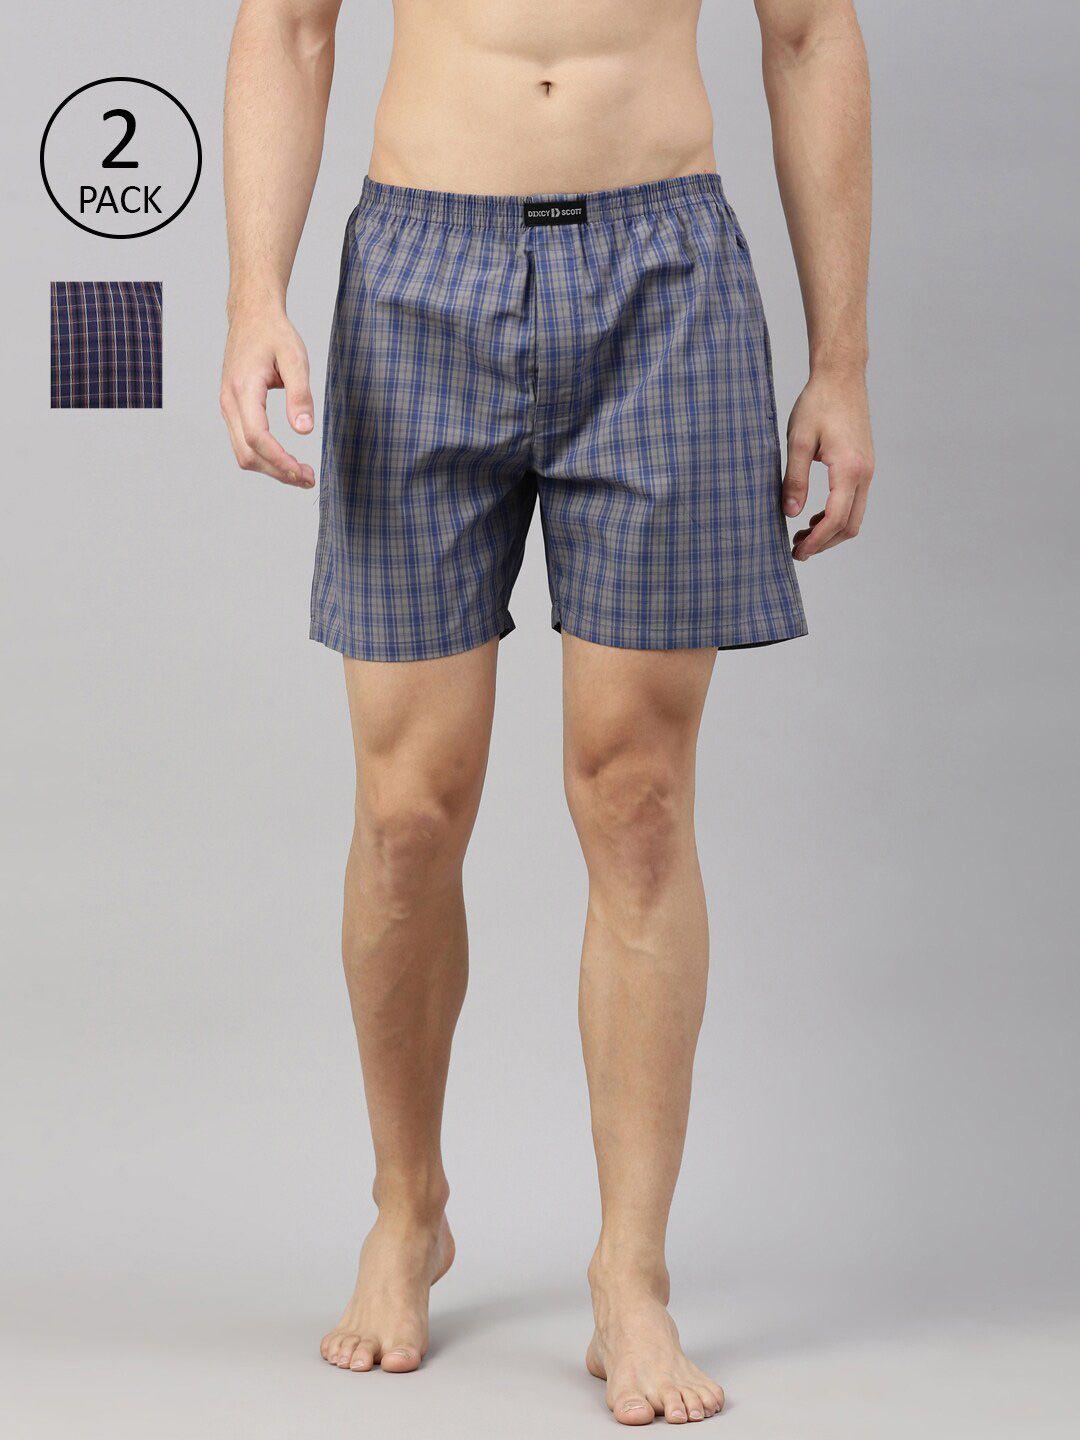 dixcy scott maximus men assorted pack of 2 checked pure cotton boxers maxbo-007